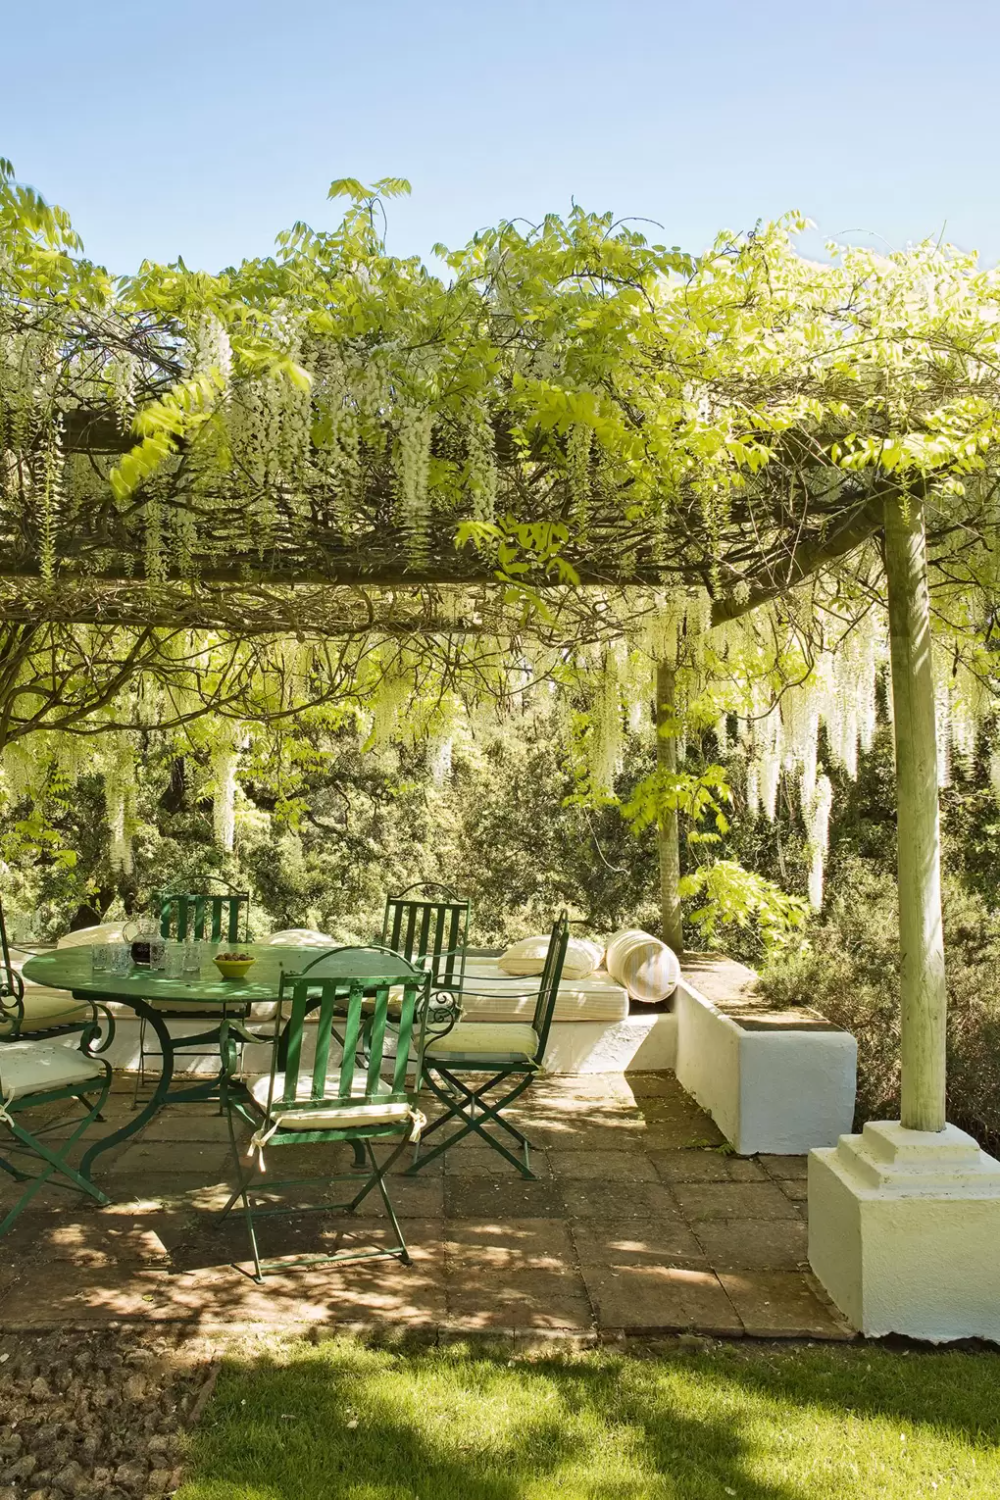 Enhance Your Outdoor Space with Comfortable Garden Seating